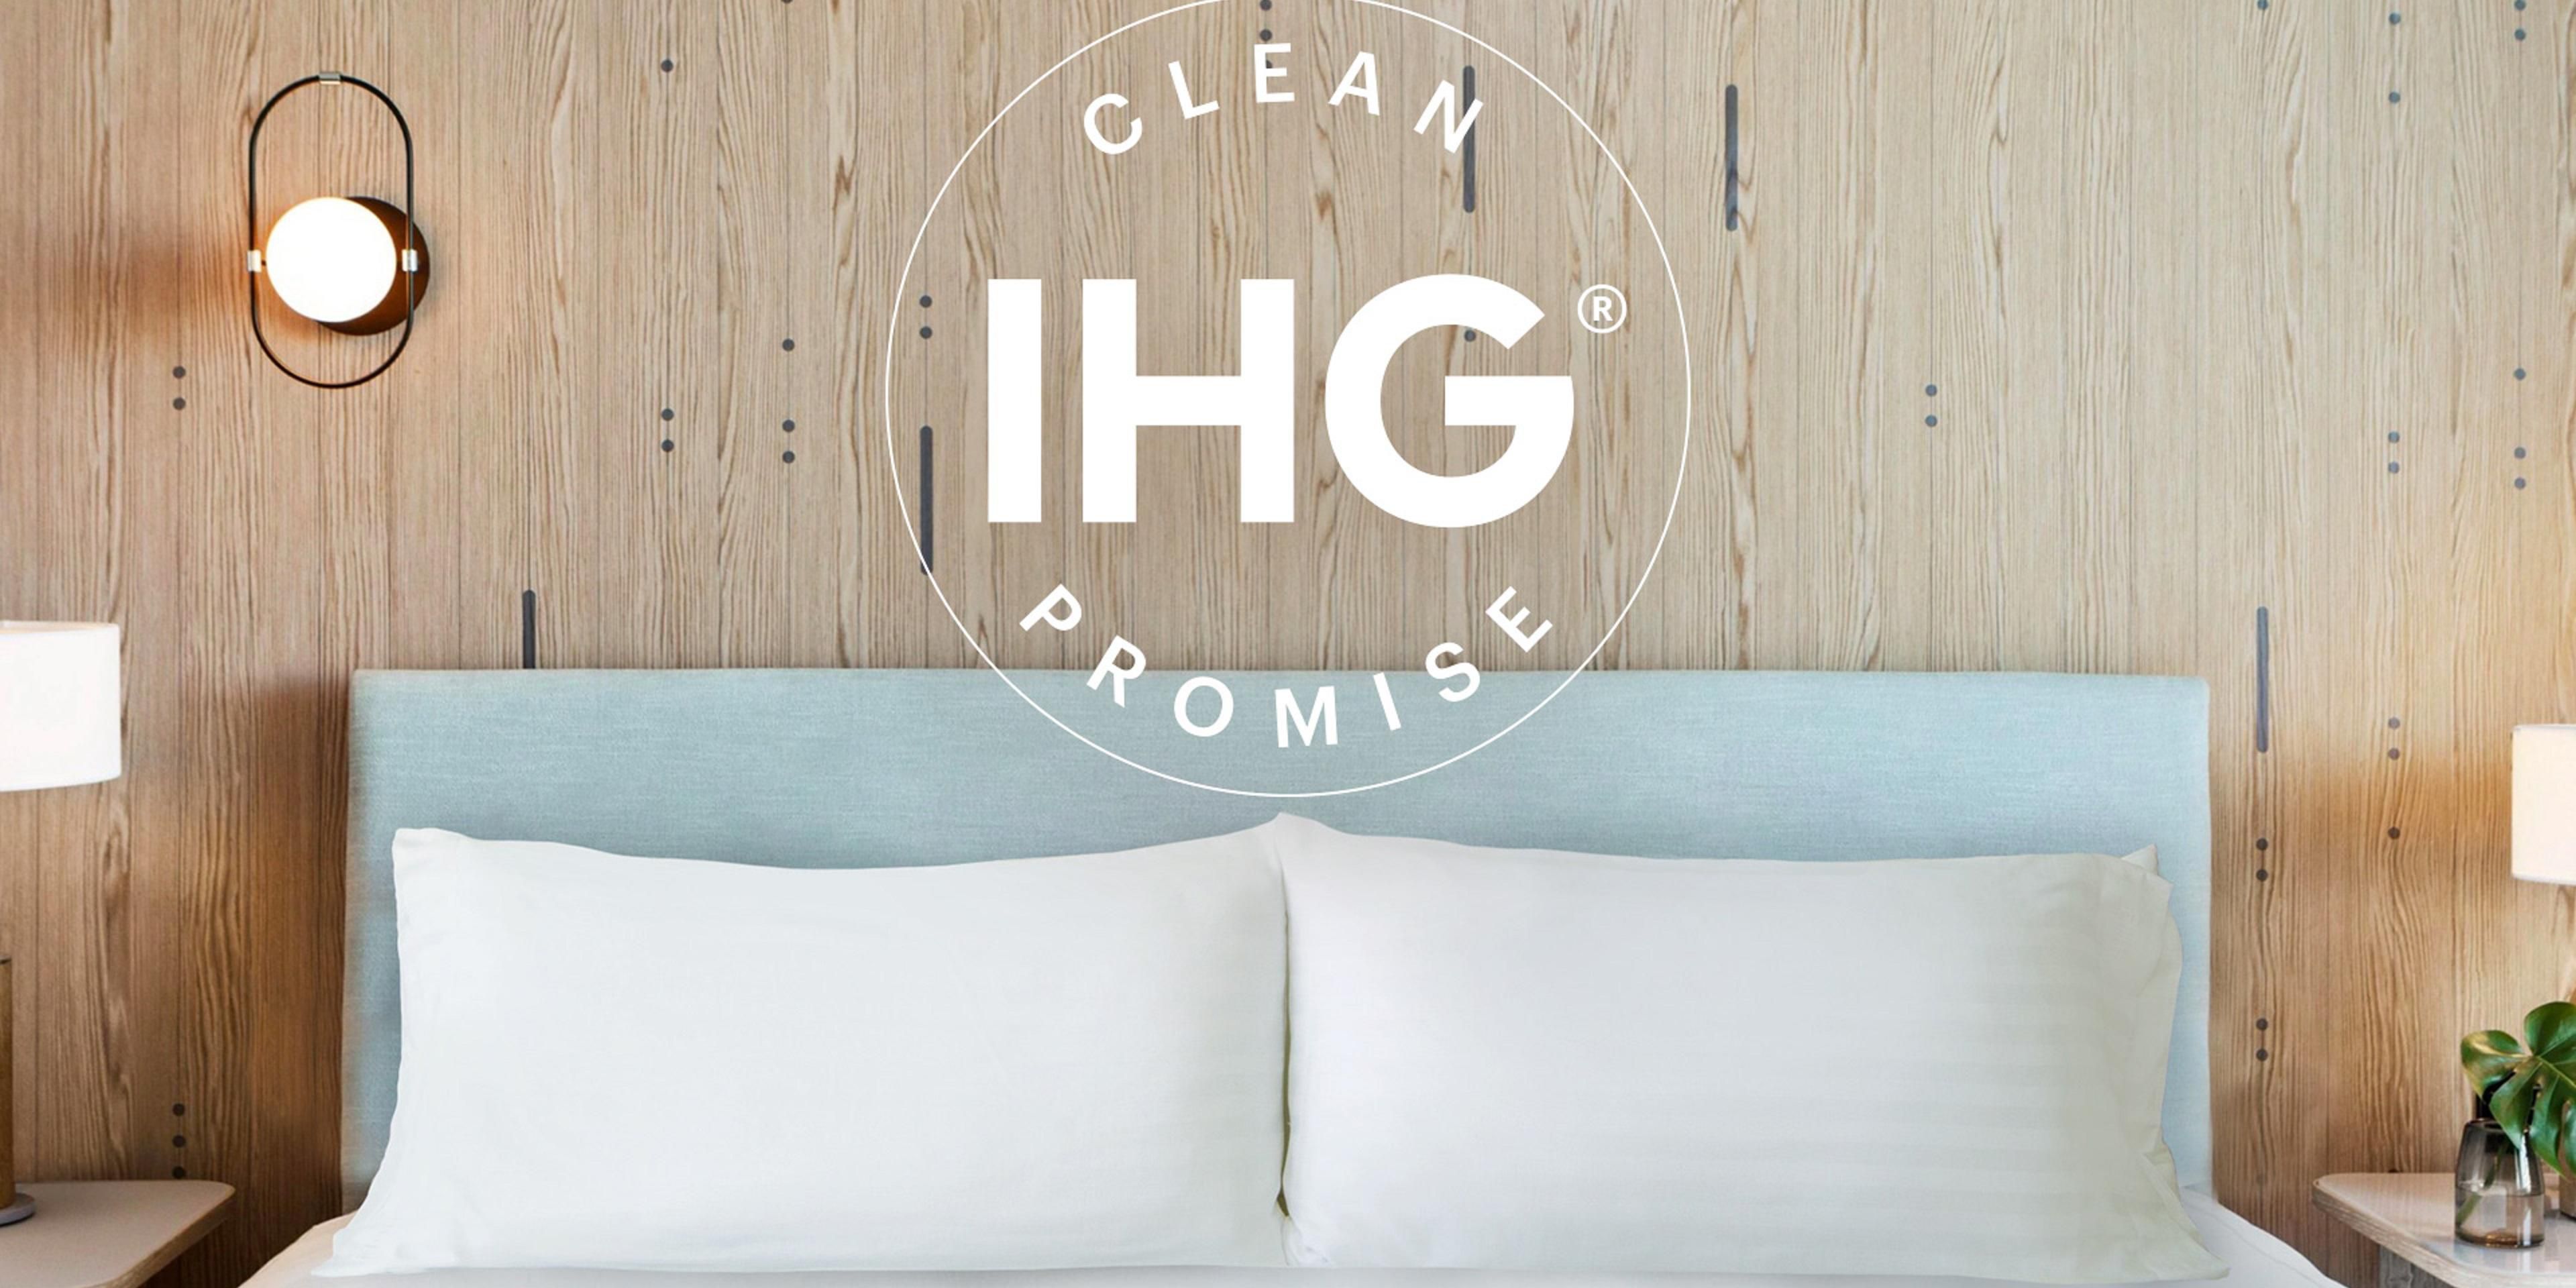 With the IHG Clean Promise, guests are reassured that: Good isn’t good enough – we’re committed to high levels of cleanliness. That means clean, well maintained, clutter free rooms that meet our standards. If this isn’t what you find when you check in then we promise to make it right.